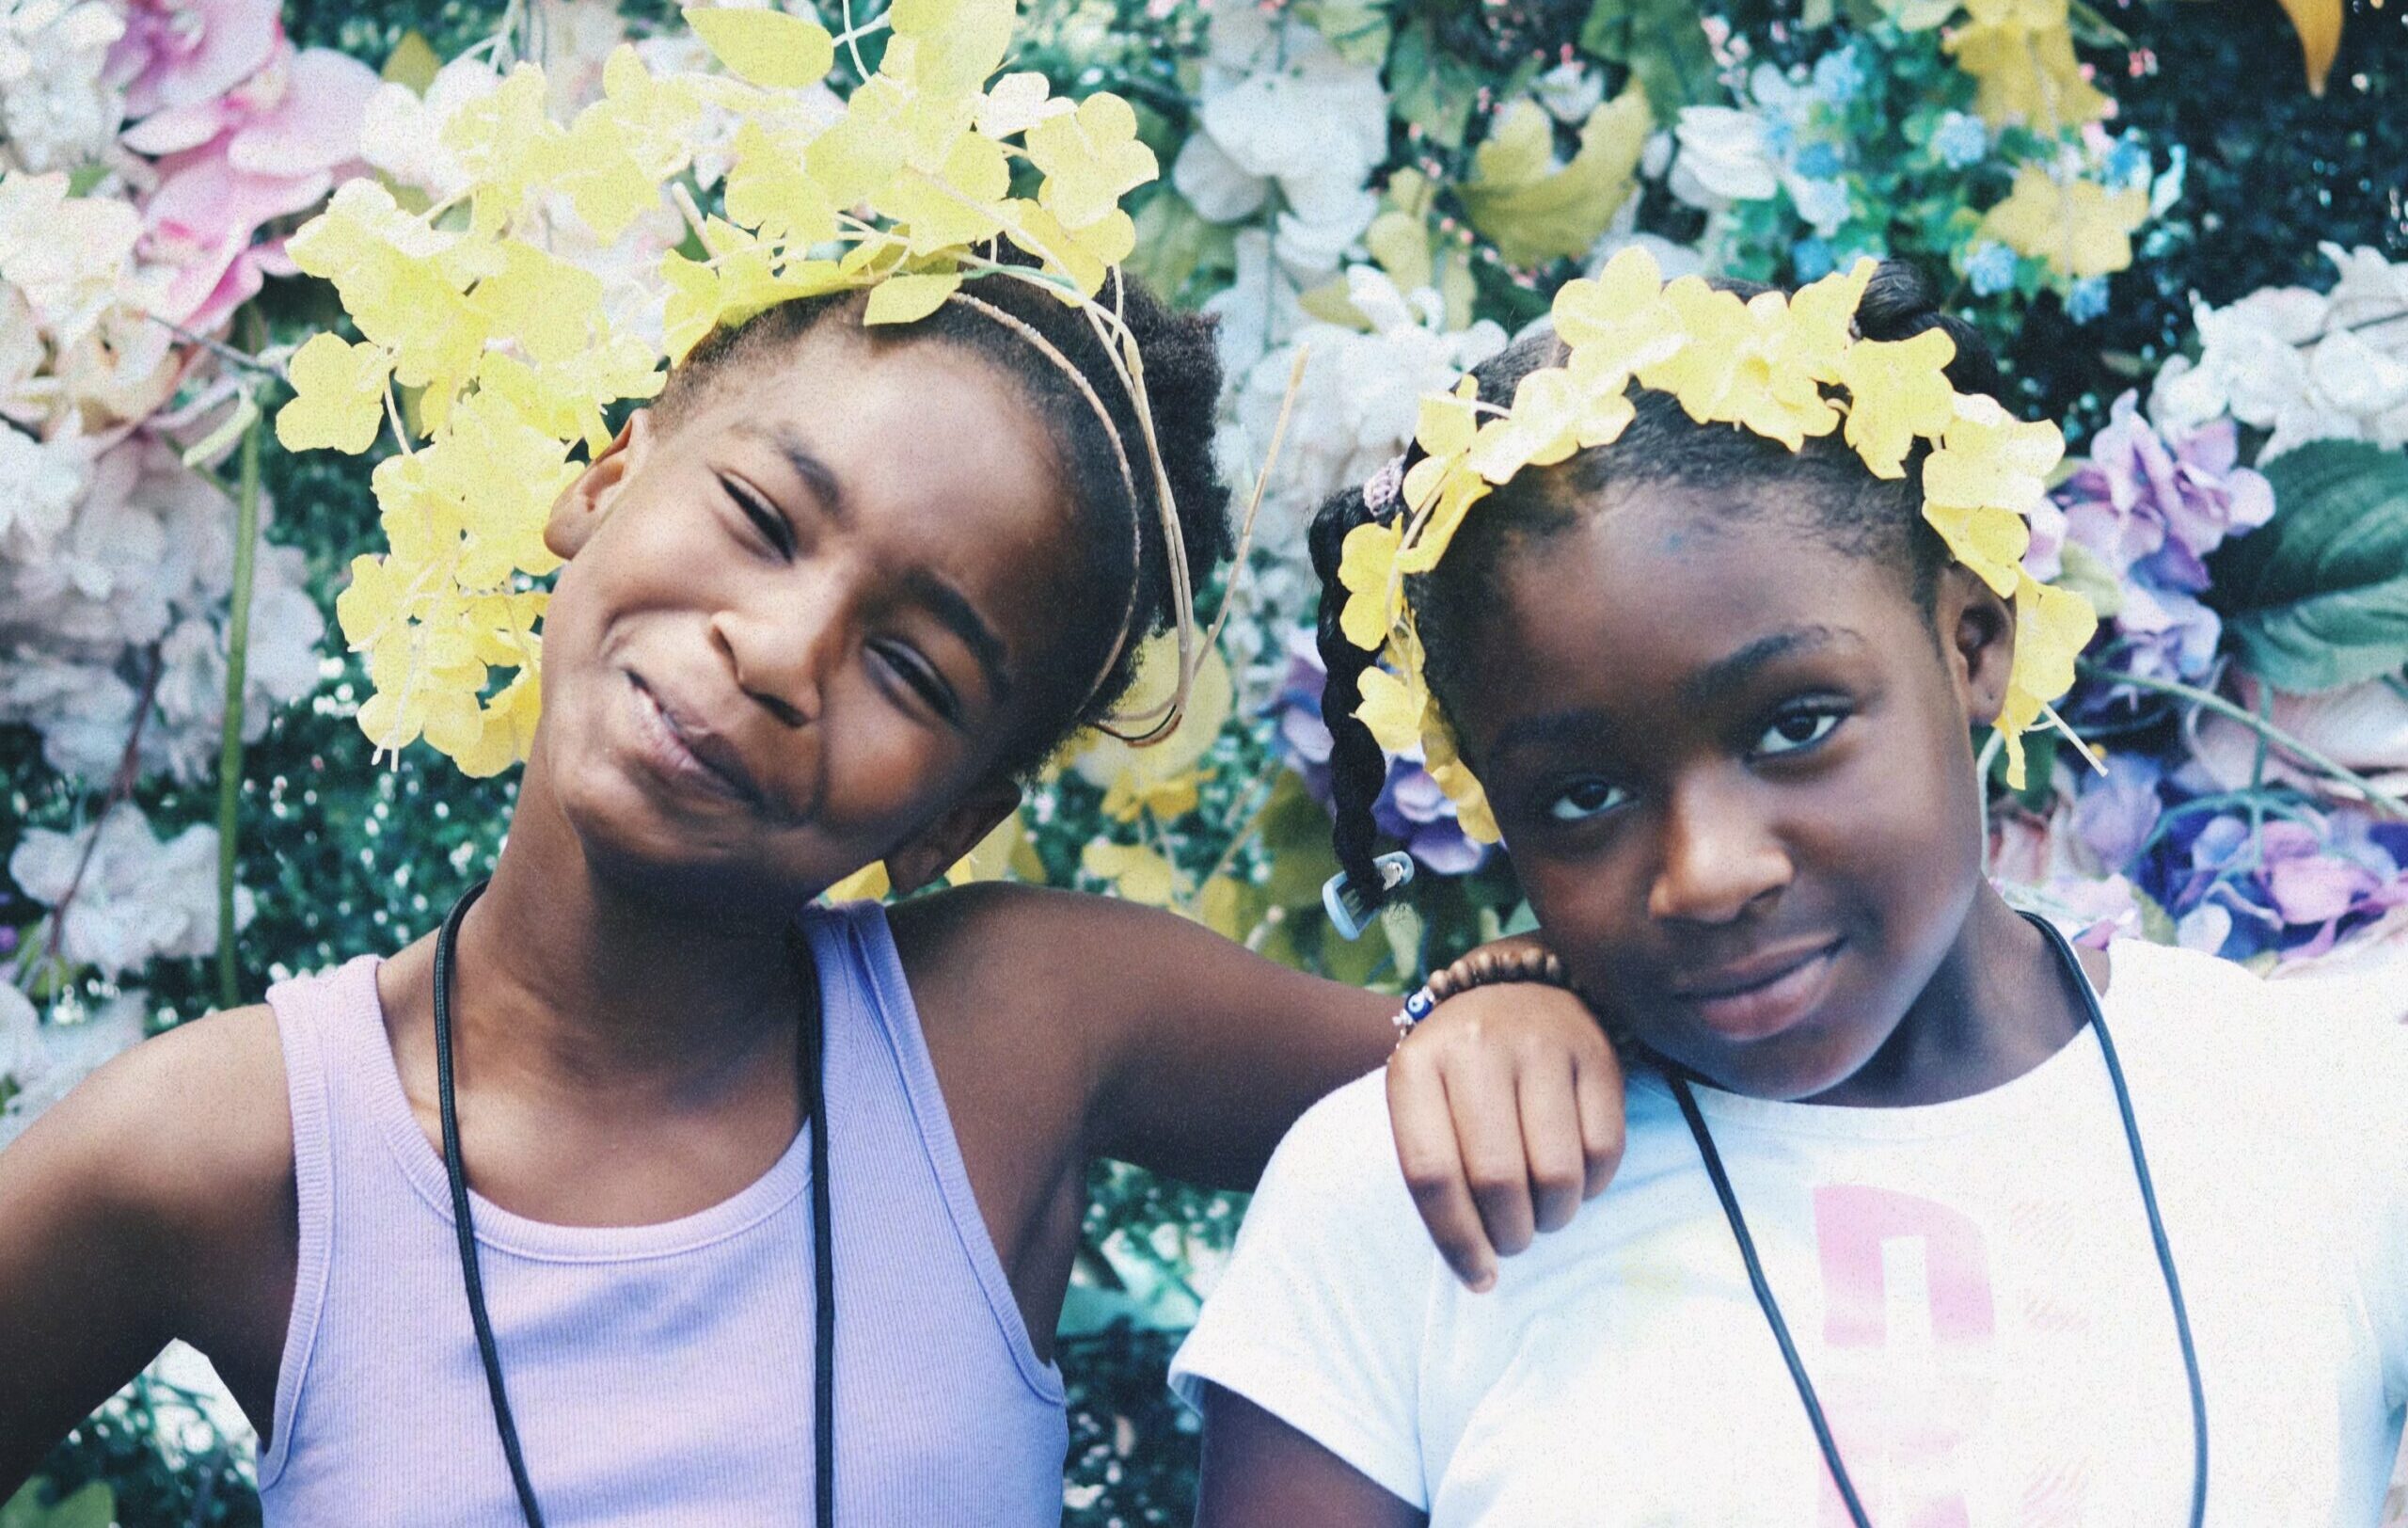 Two young girls smiling with flowers in their hair.